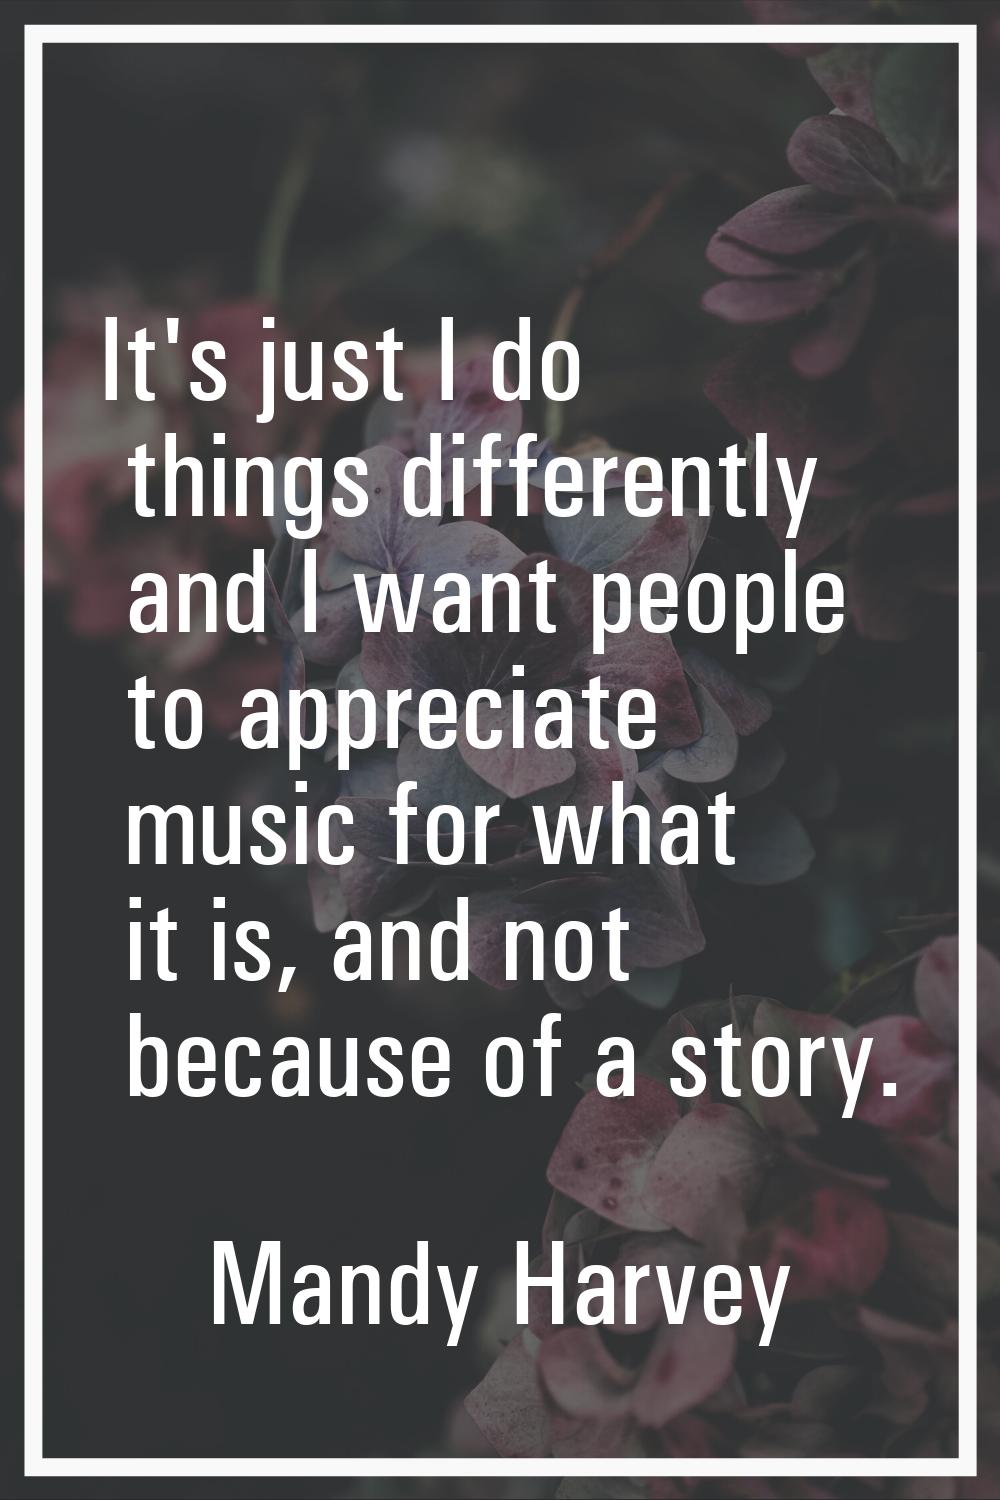 It's just I do things differently and I want people to appreciate music for what it is, and not bec